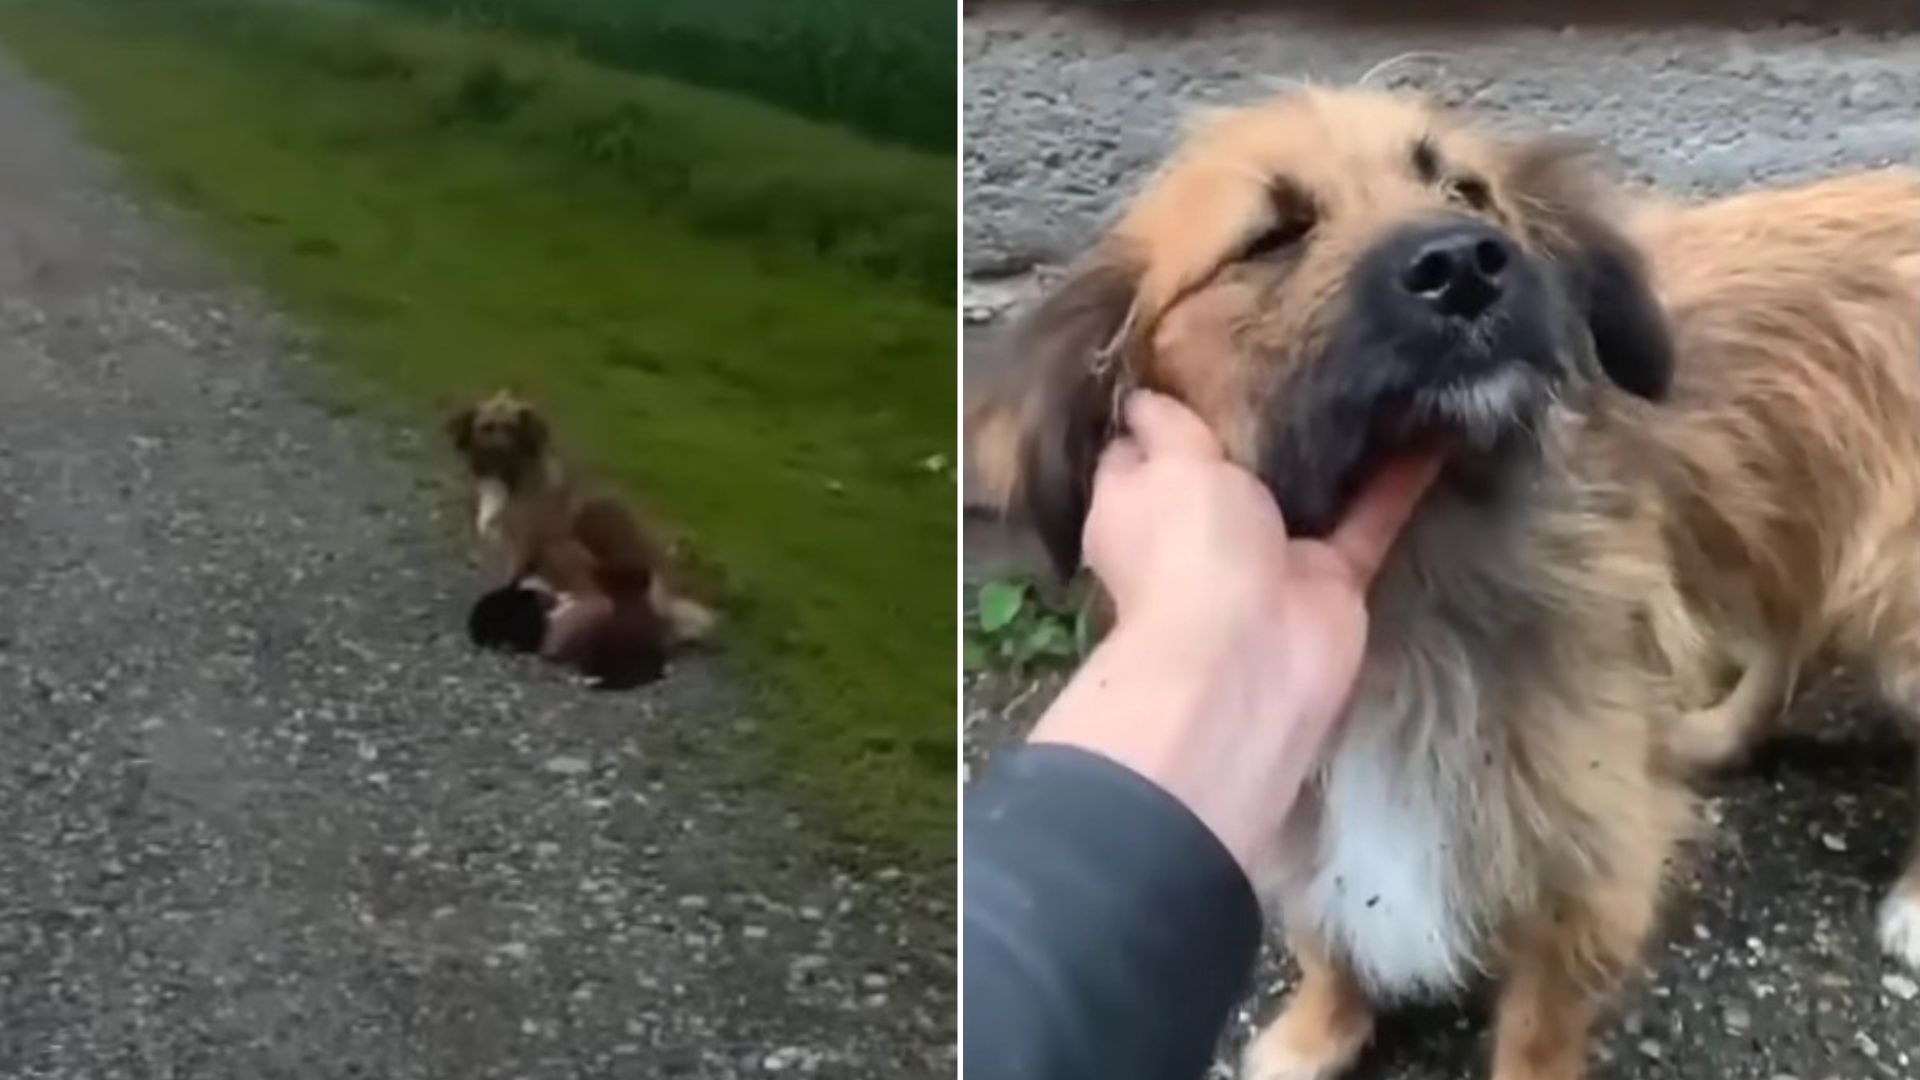 This Mom Dog Was Desperate For Help, So She Begged Passersby To Save Her Babies